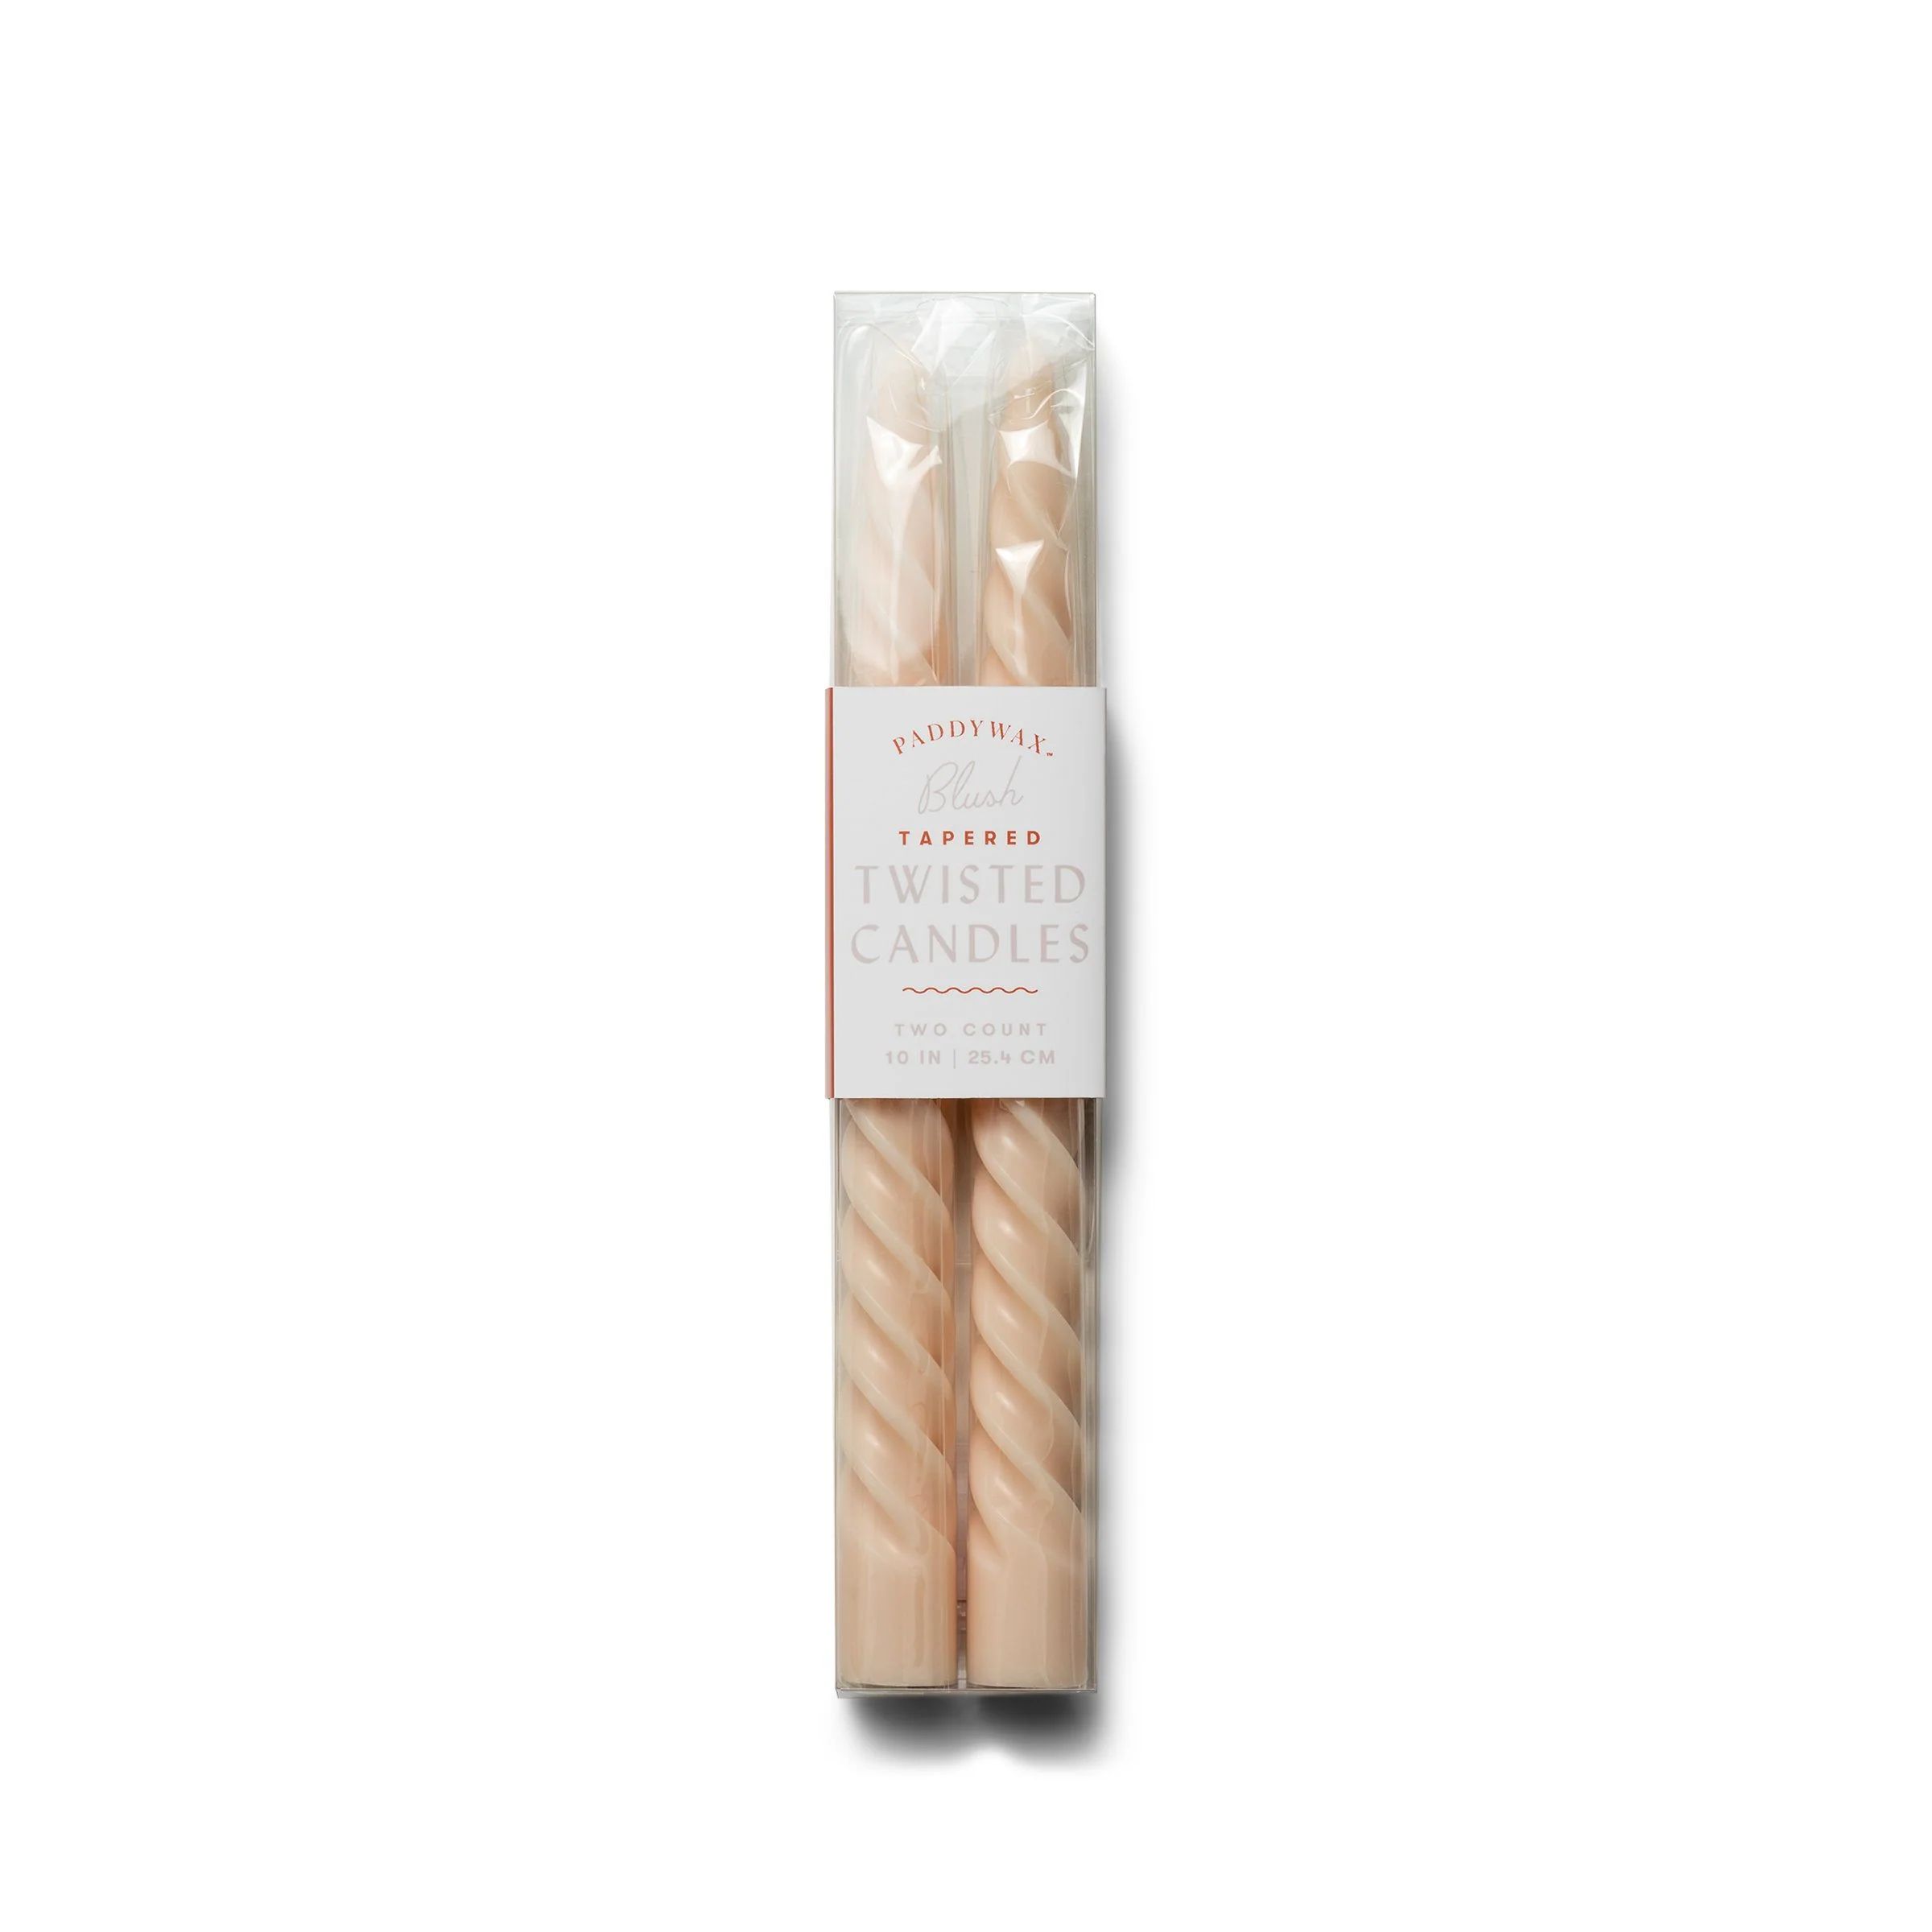 Blush Twisted Taper Candles | Paddywax